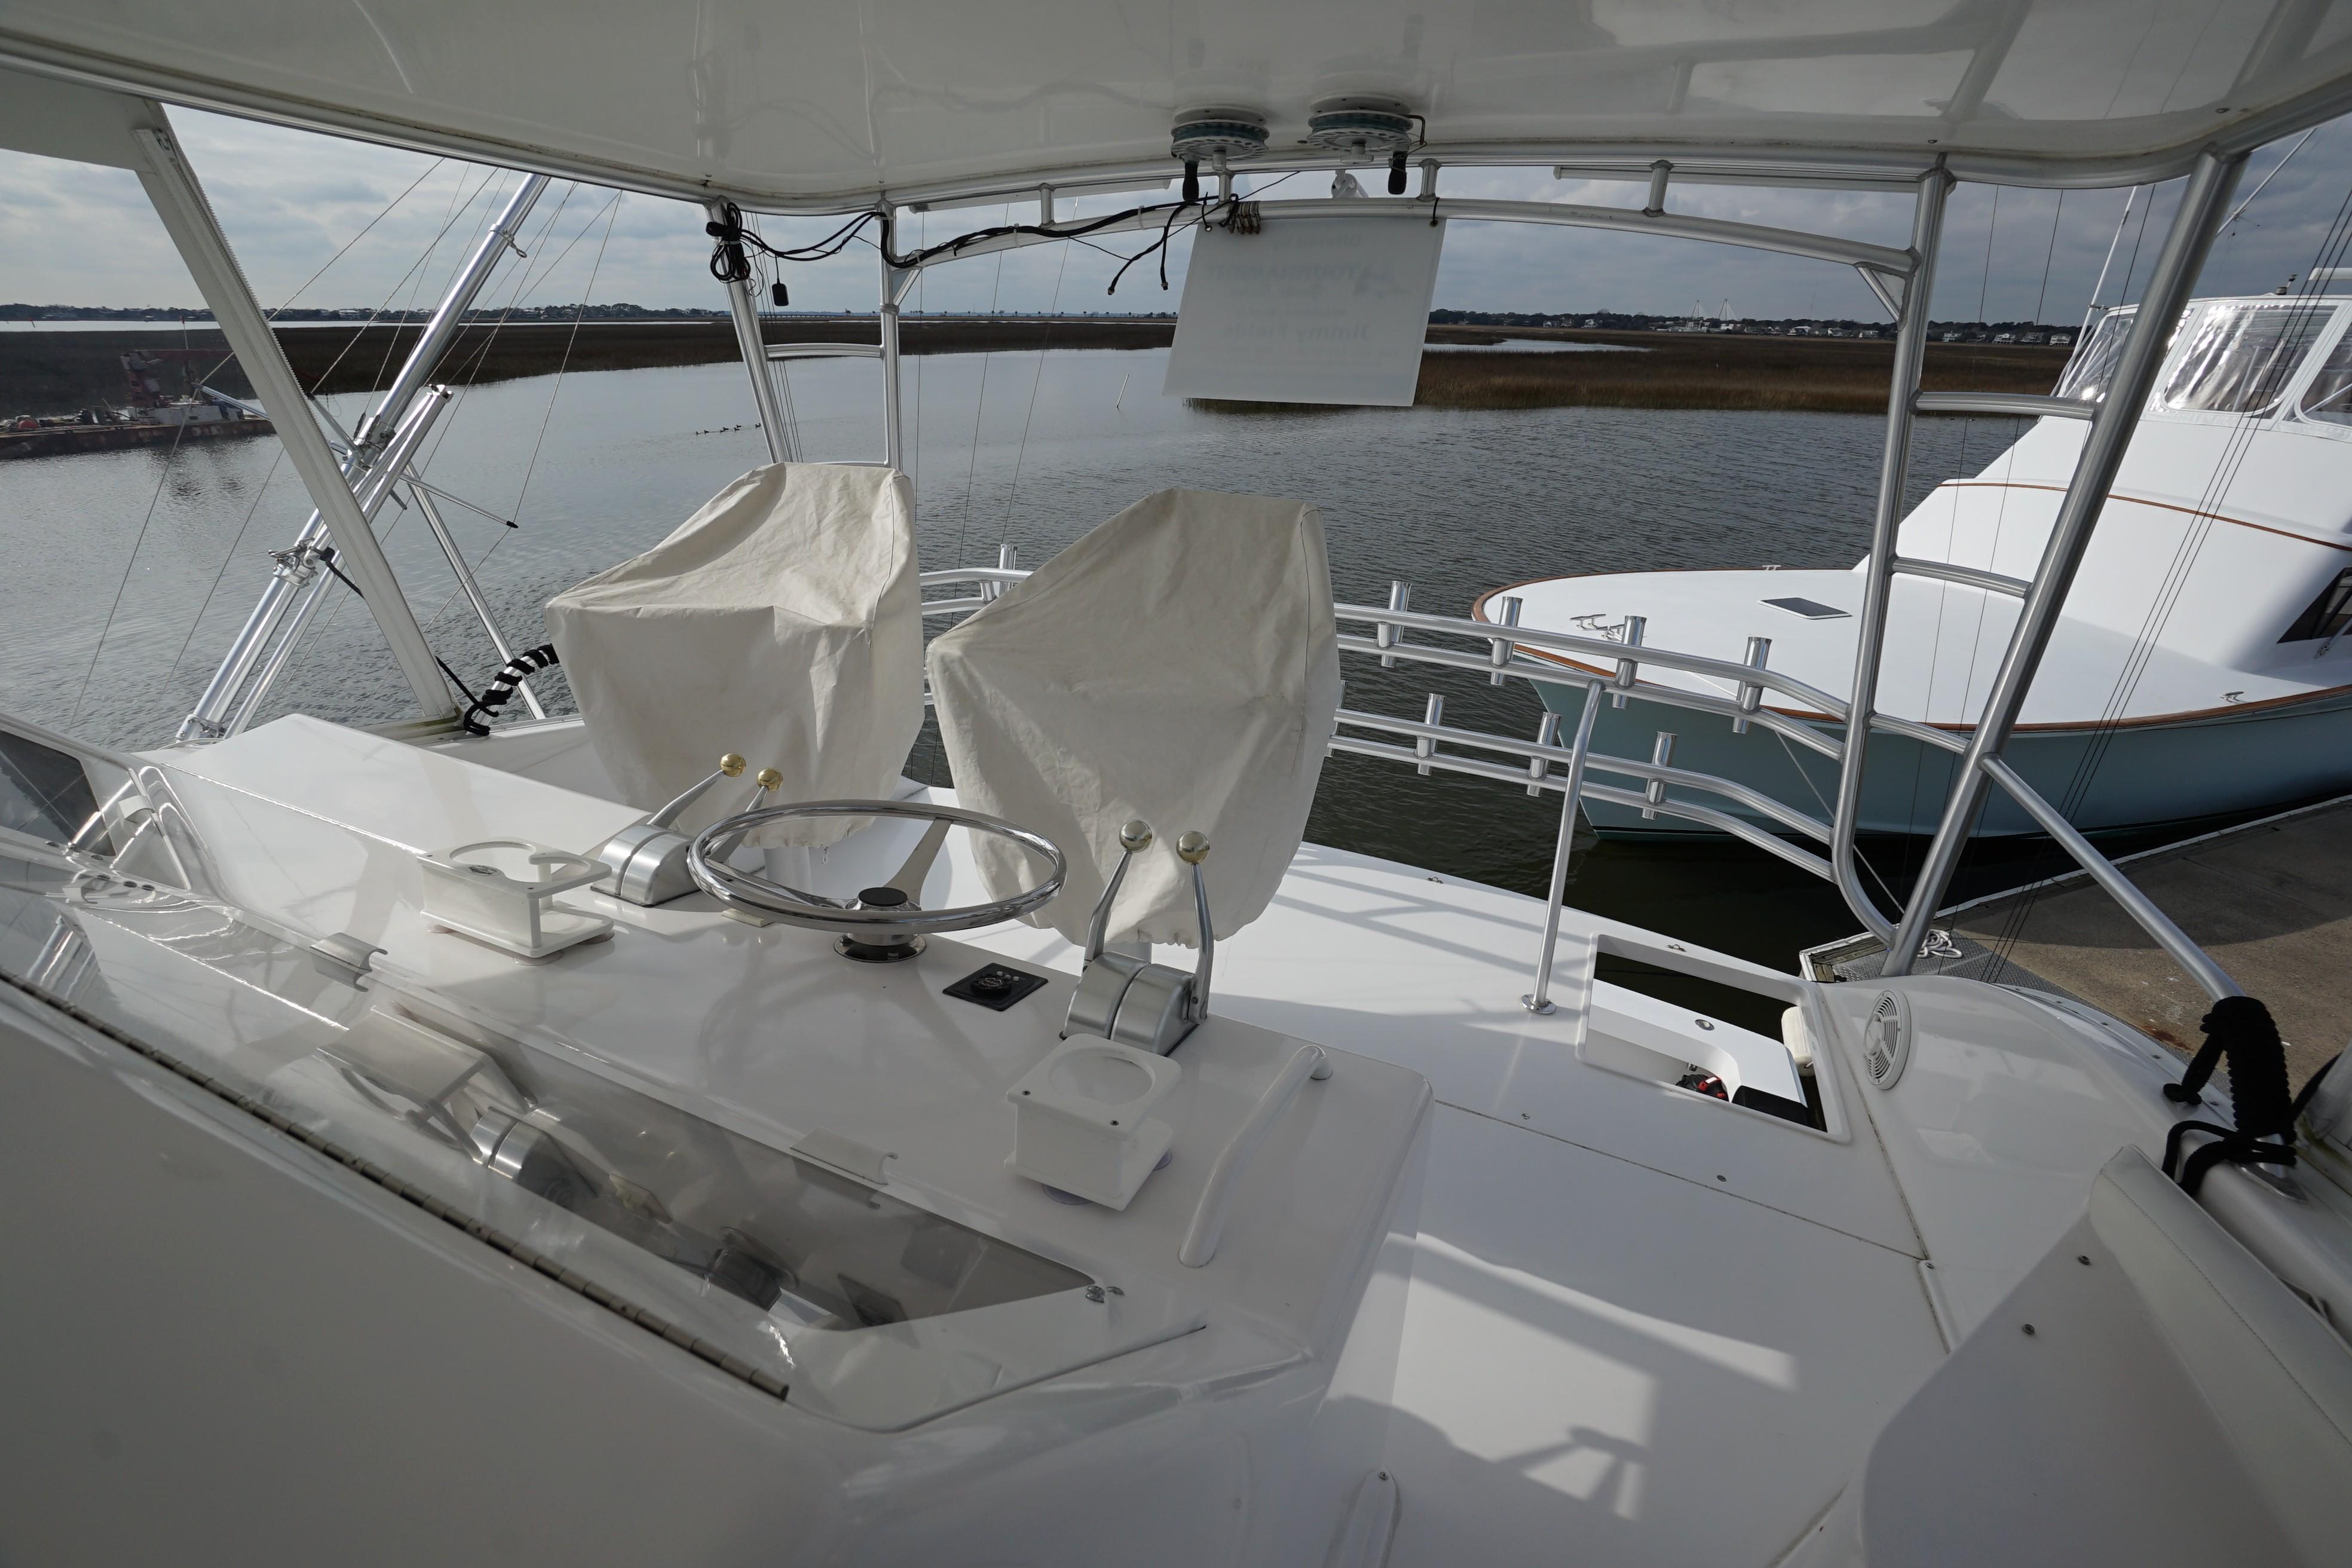 Halcyon Yacht for Sale 55 Viking Yachts Ocean City, MD